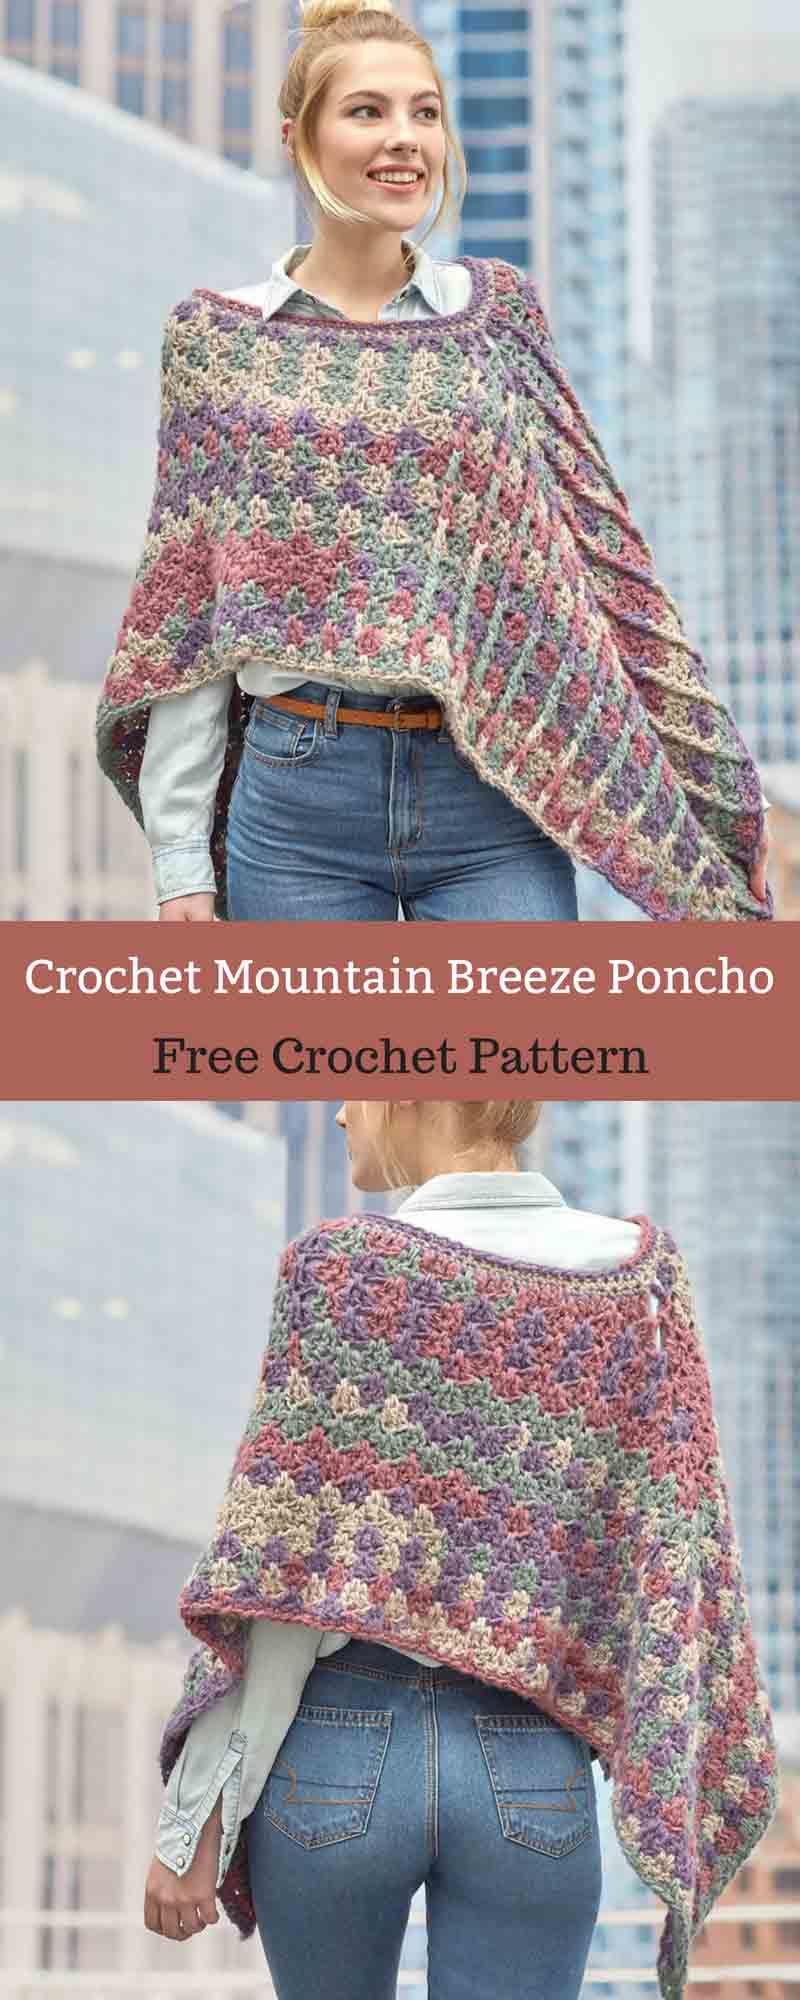 Free Crochet Patterns For Ponchos Mountain Breeze Poncho Free Crochet Pattern All About Patterns